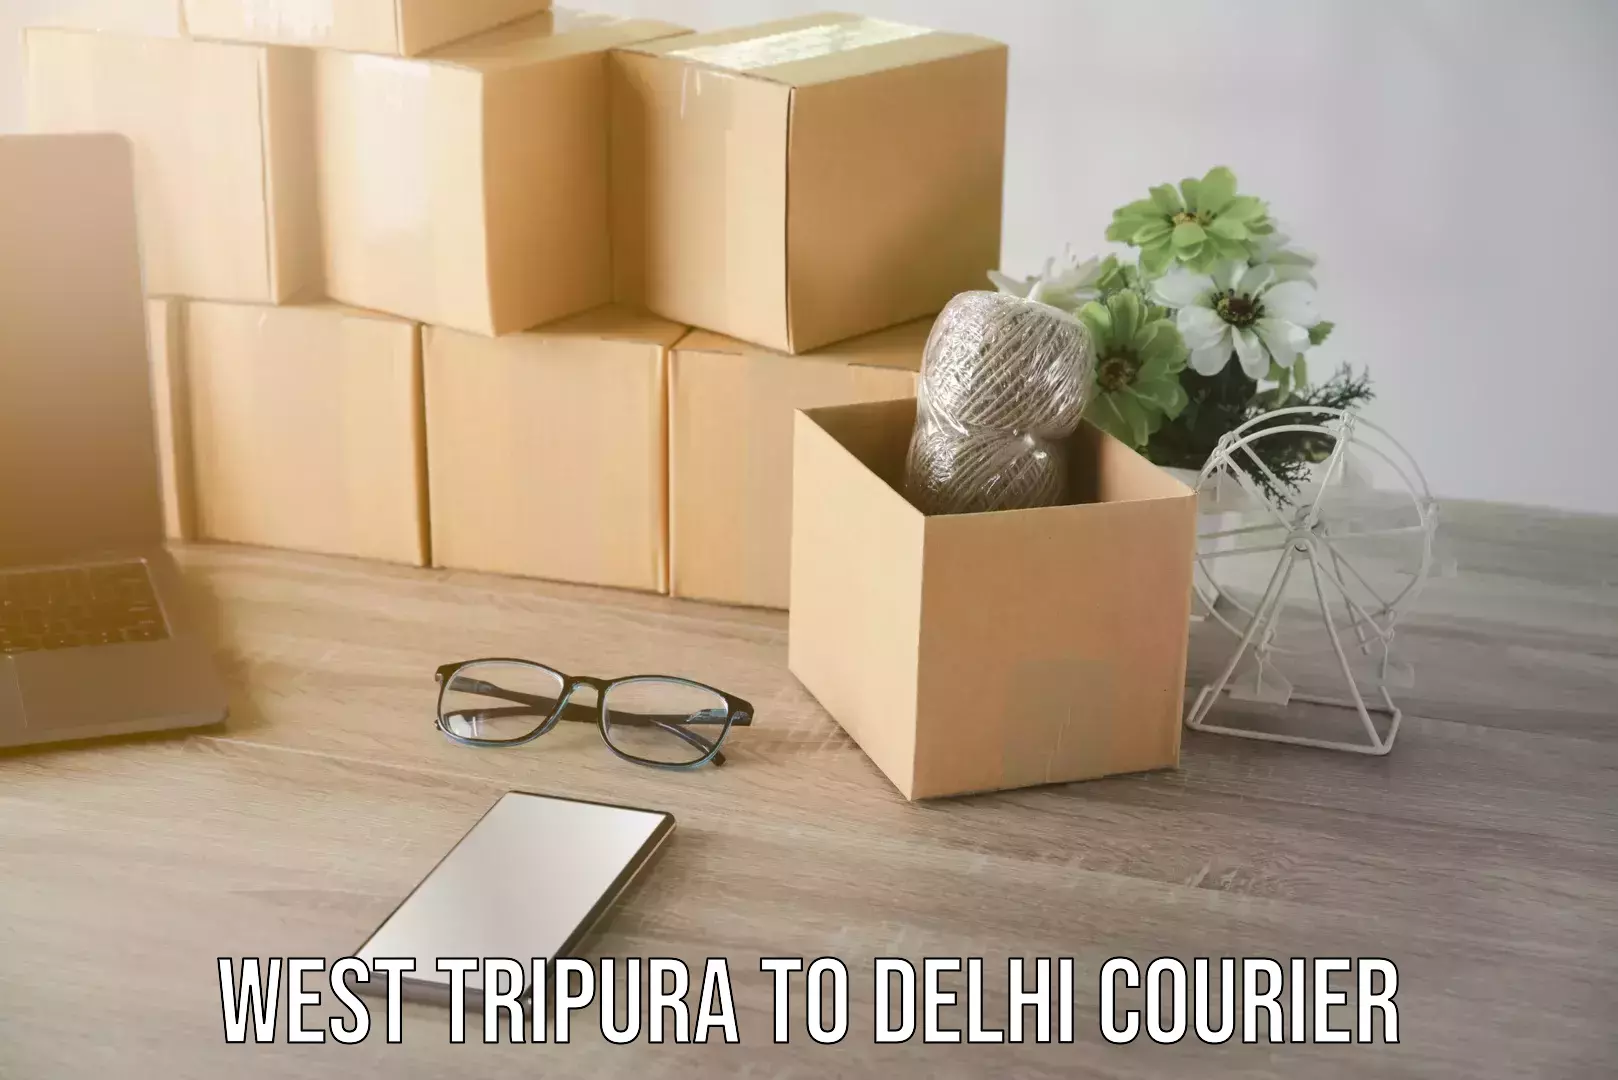 Sustainable courier practices West Tripura to Delhi